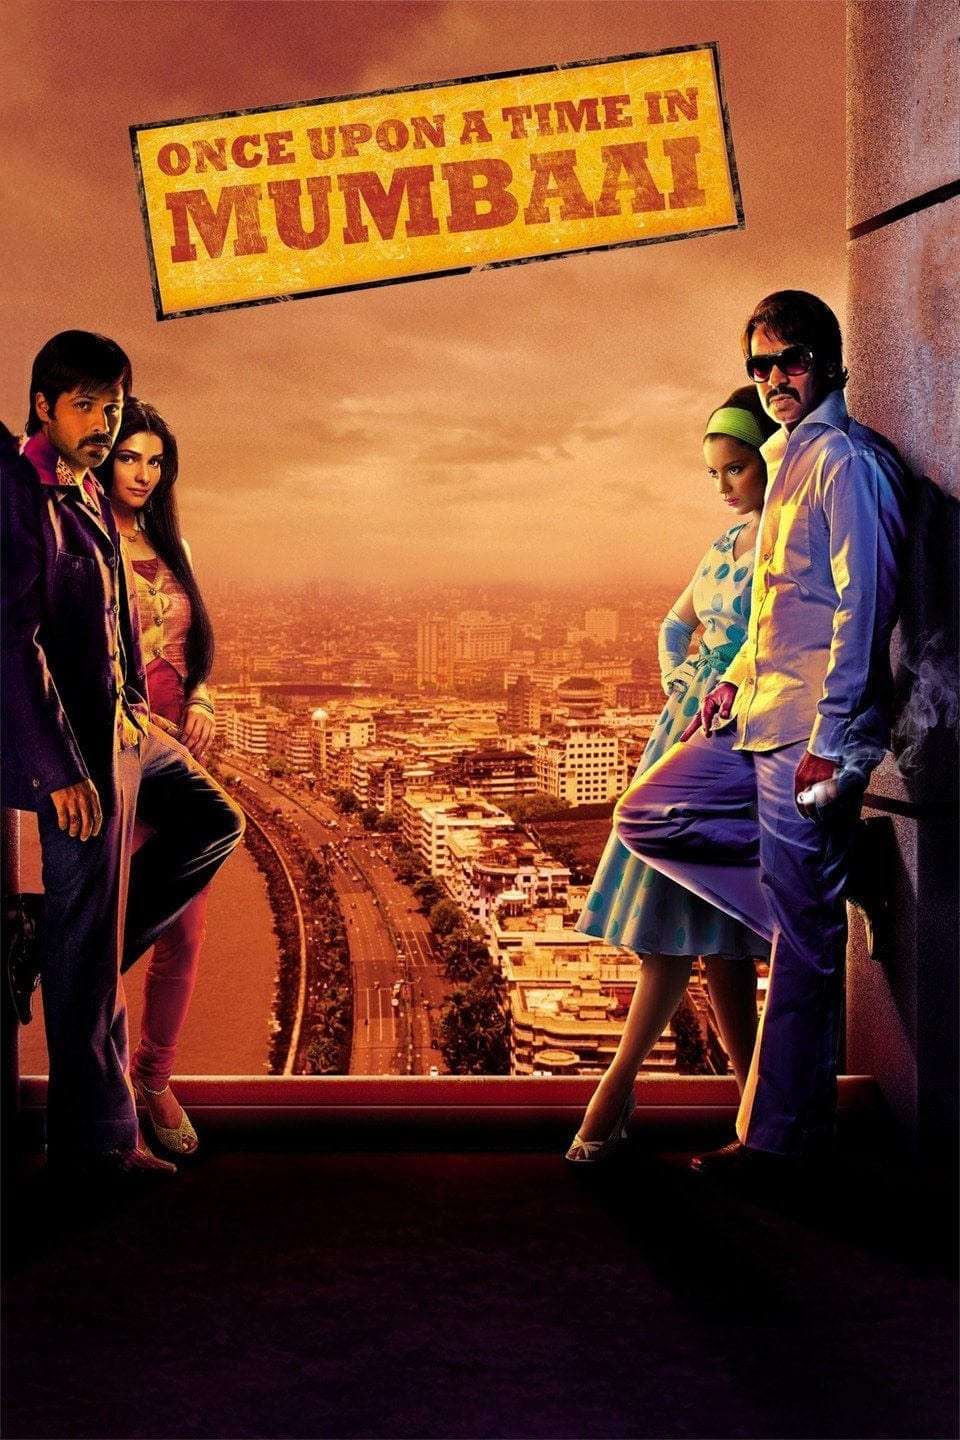 Poster for the movie "Once Upon a Time in Mumbaai"